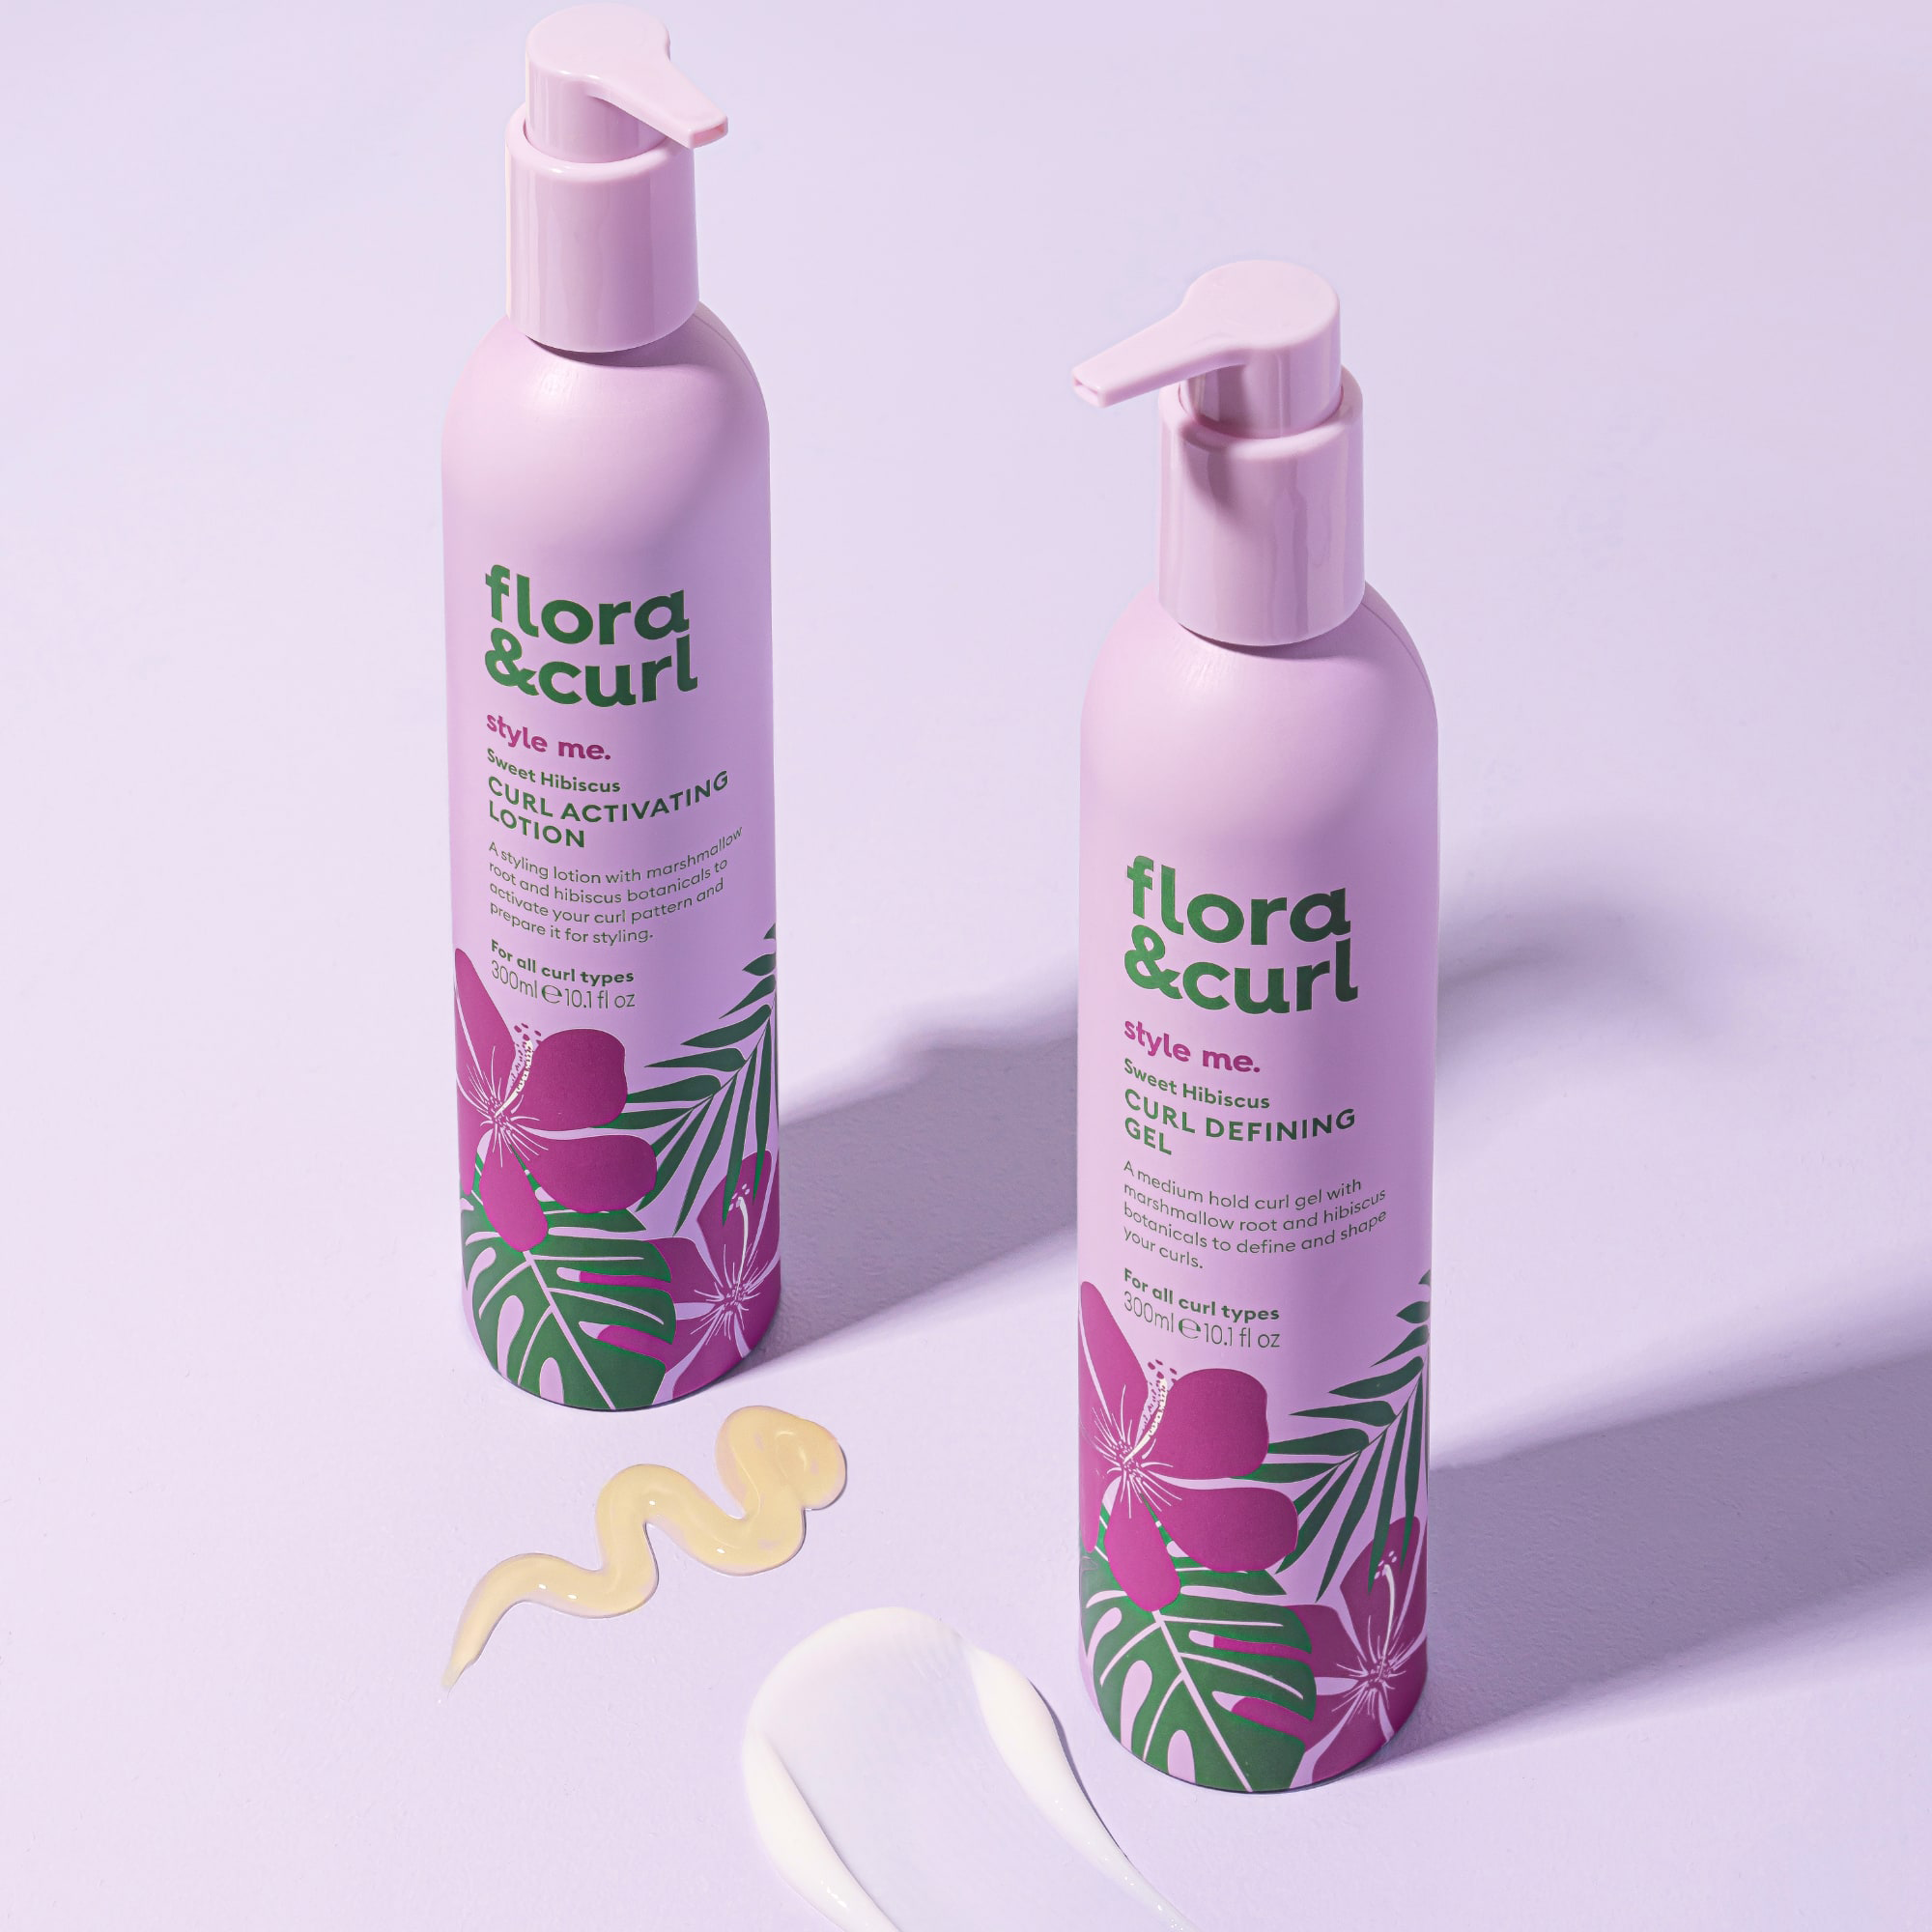 Flora & Curl Sweet Hibiscus Curl Activating Lotion 